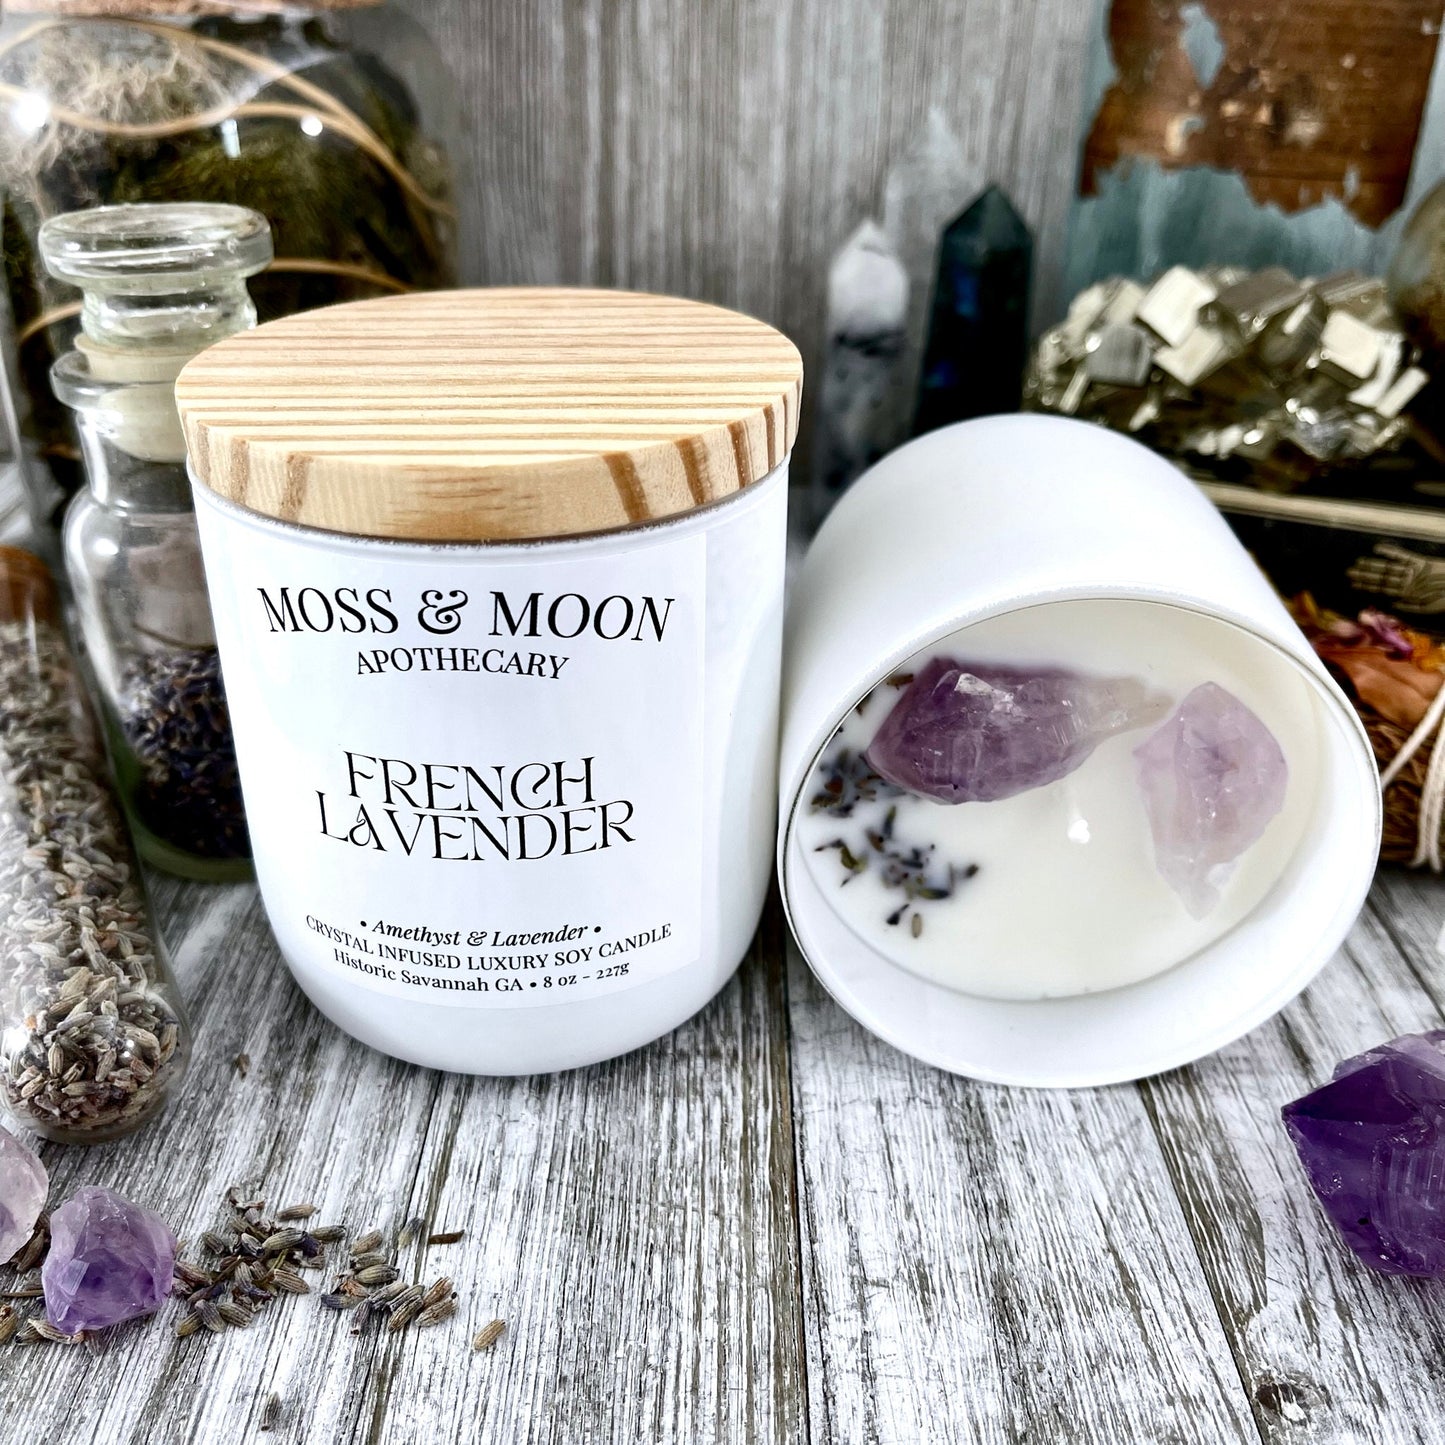 amethyst candle, aromatherapy candle, Candles, Candles & Holders, Container Candles, crystal candle, Crystal Candles, crystal healing, eco-friendly candle, Etsy ID: 1466050510, handmade candle, Home & Living, Home Decor, Lavender candle, luxury candle, me